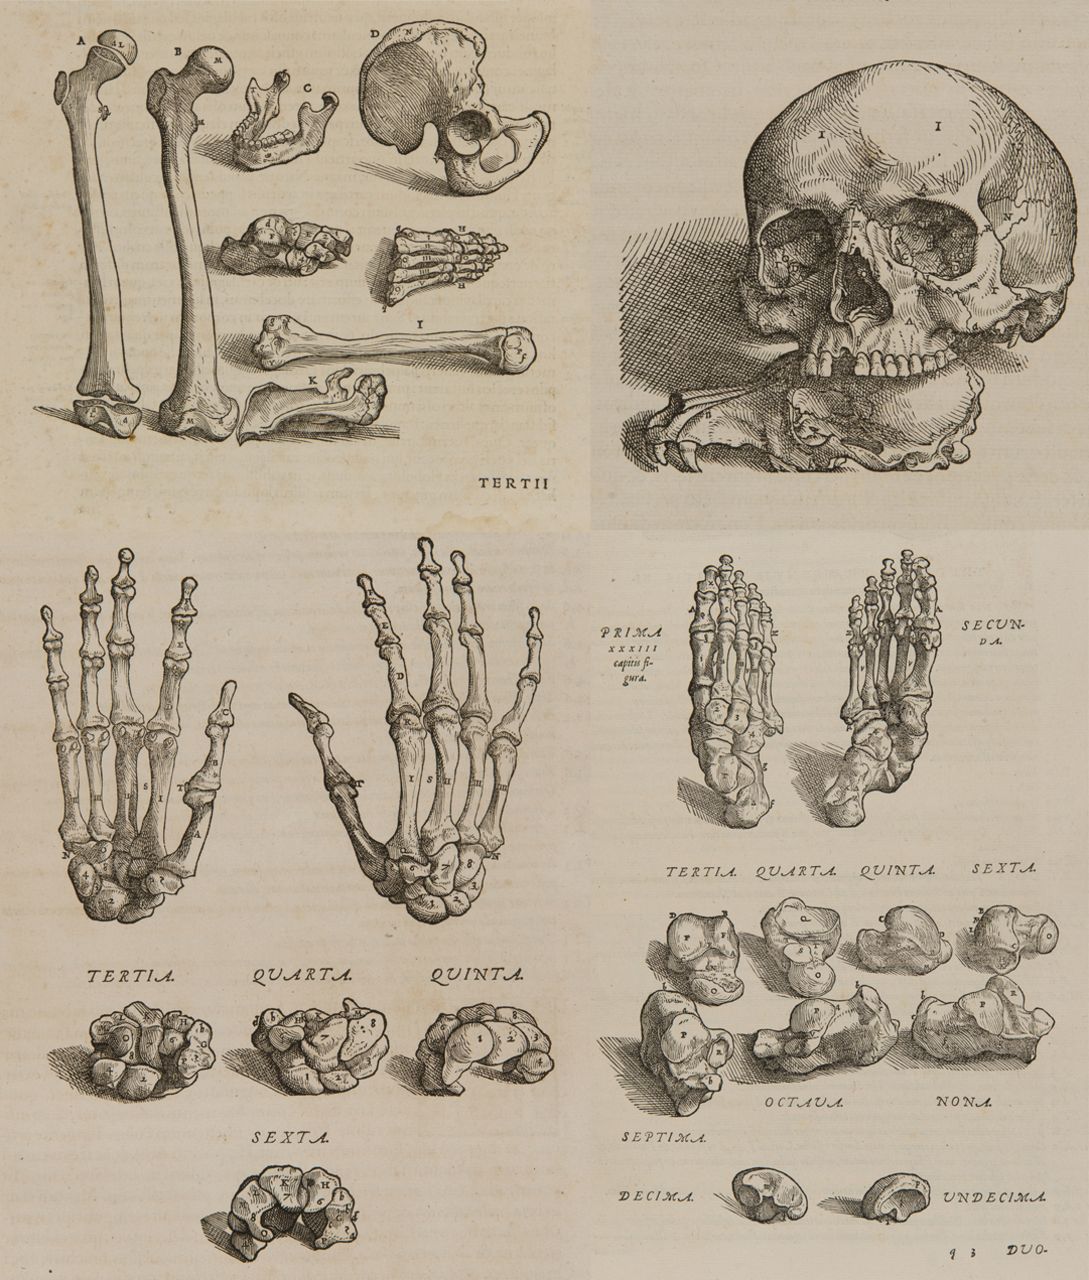 Fig. 2 
            Original anatomical illustrations of the osteology from Andreas Vesalius’ work entitledDe humani corporis fabrica libri primus (1555).8 Courtesy of University Library of Groningen, special collections (uklu KW C 569).
          